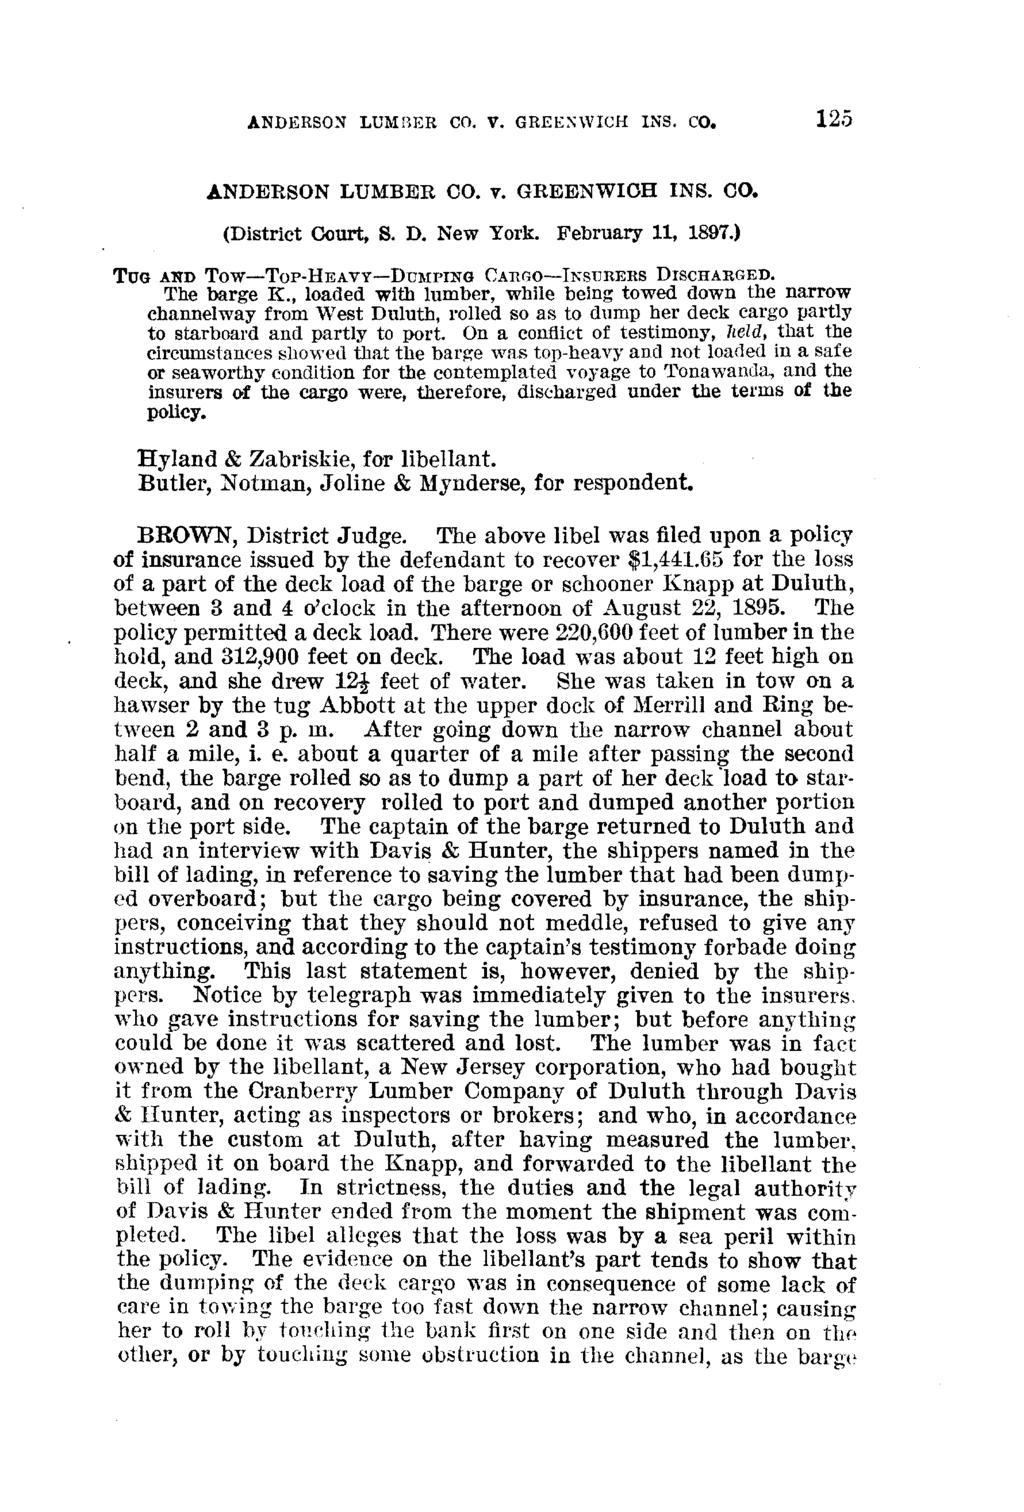 LUMBER CO. V. GREK;\;WICH INS. CO. 12.5 ANDERSON LUMBER CO. v. GREENWICH INS. CO. (District Court, S. D. New York. February 11, 1897.) TUG AND Tow-Top-HEAVV-DUl\IPING CARGO-IKSURERS DISCHARGED.